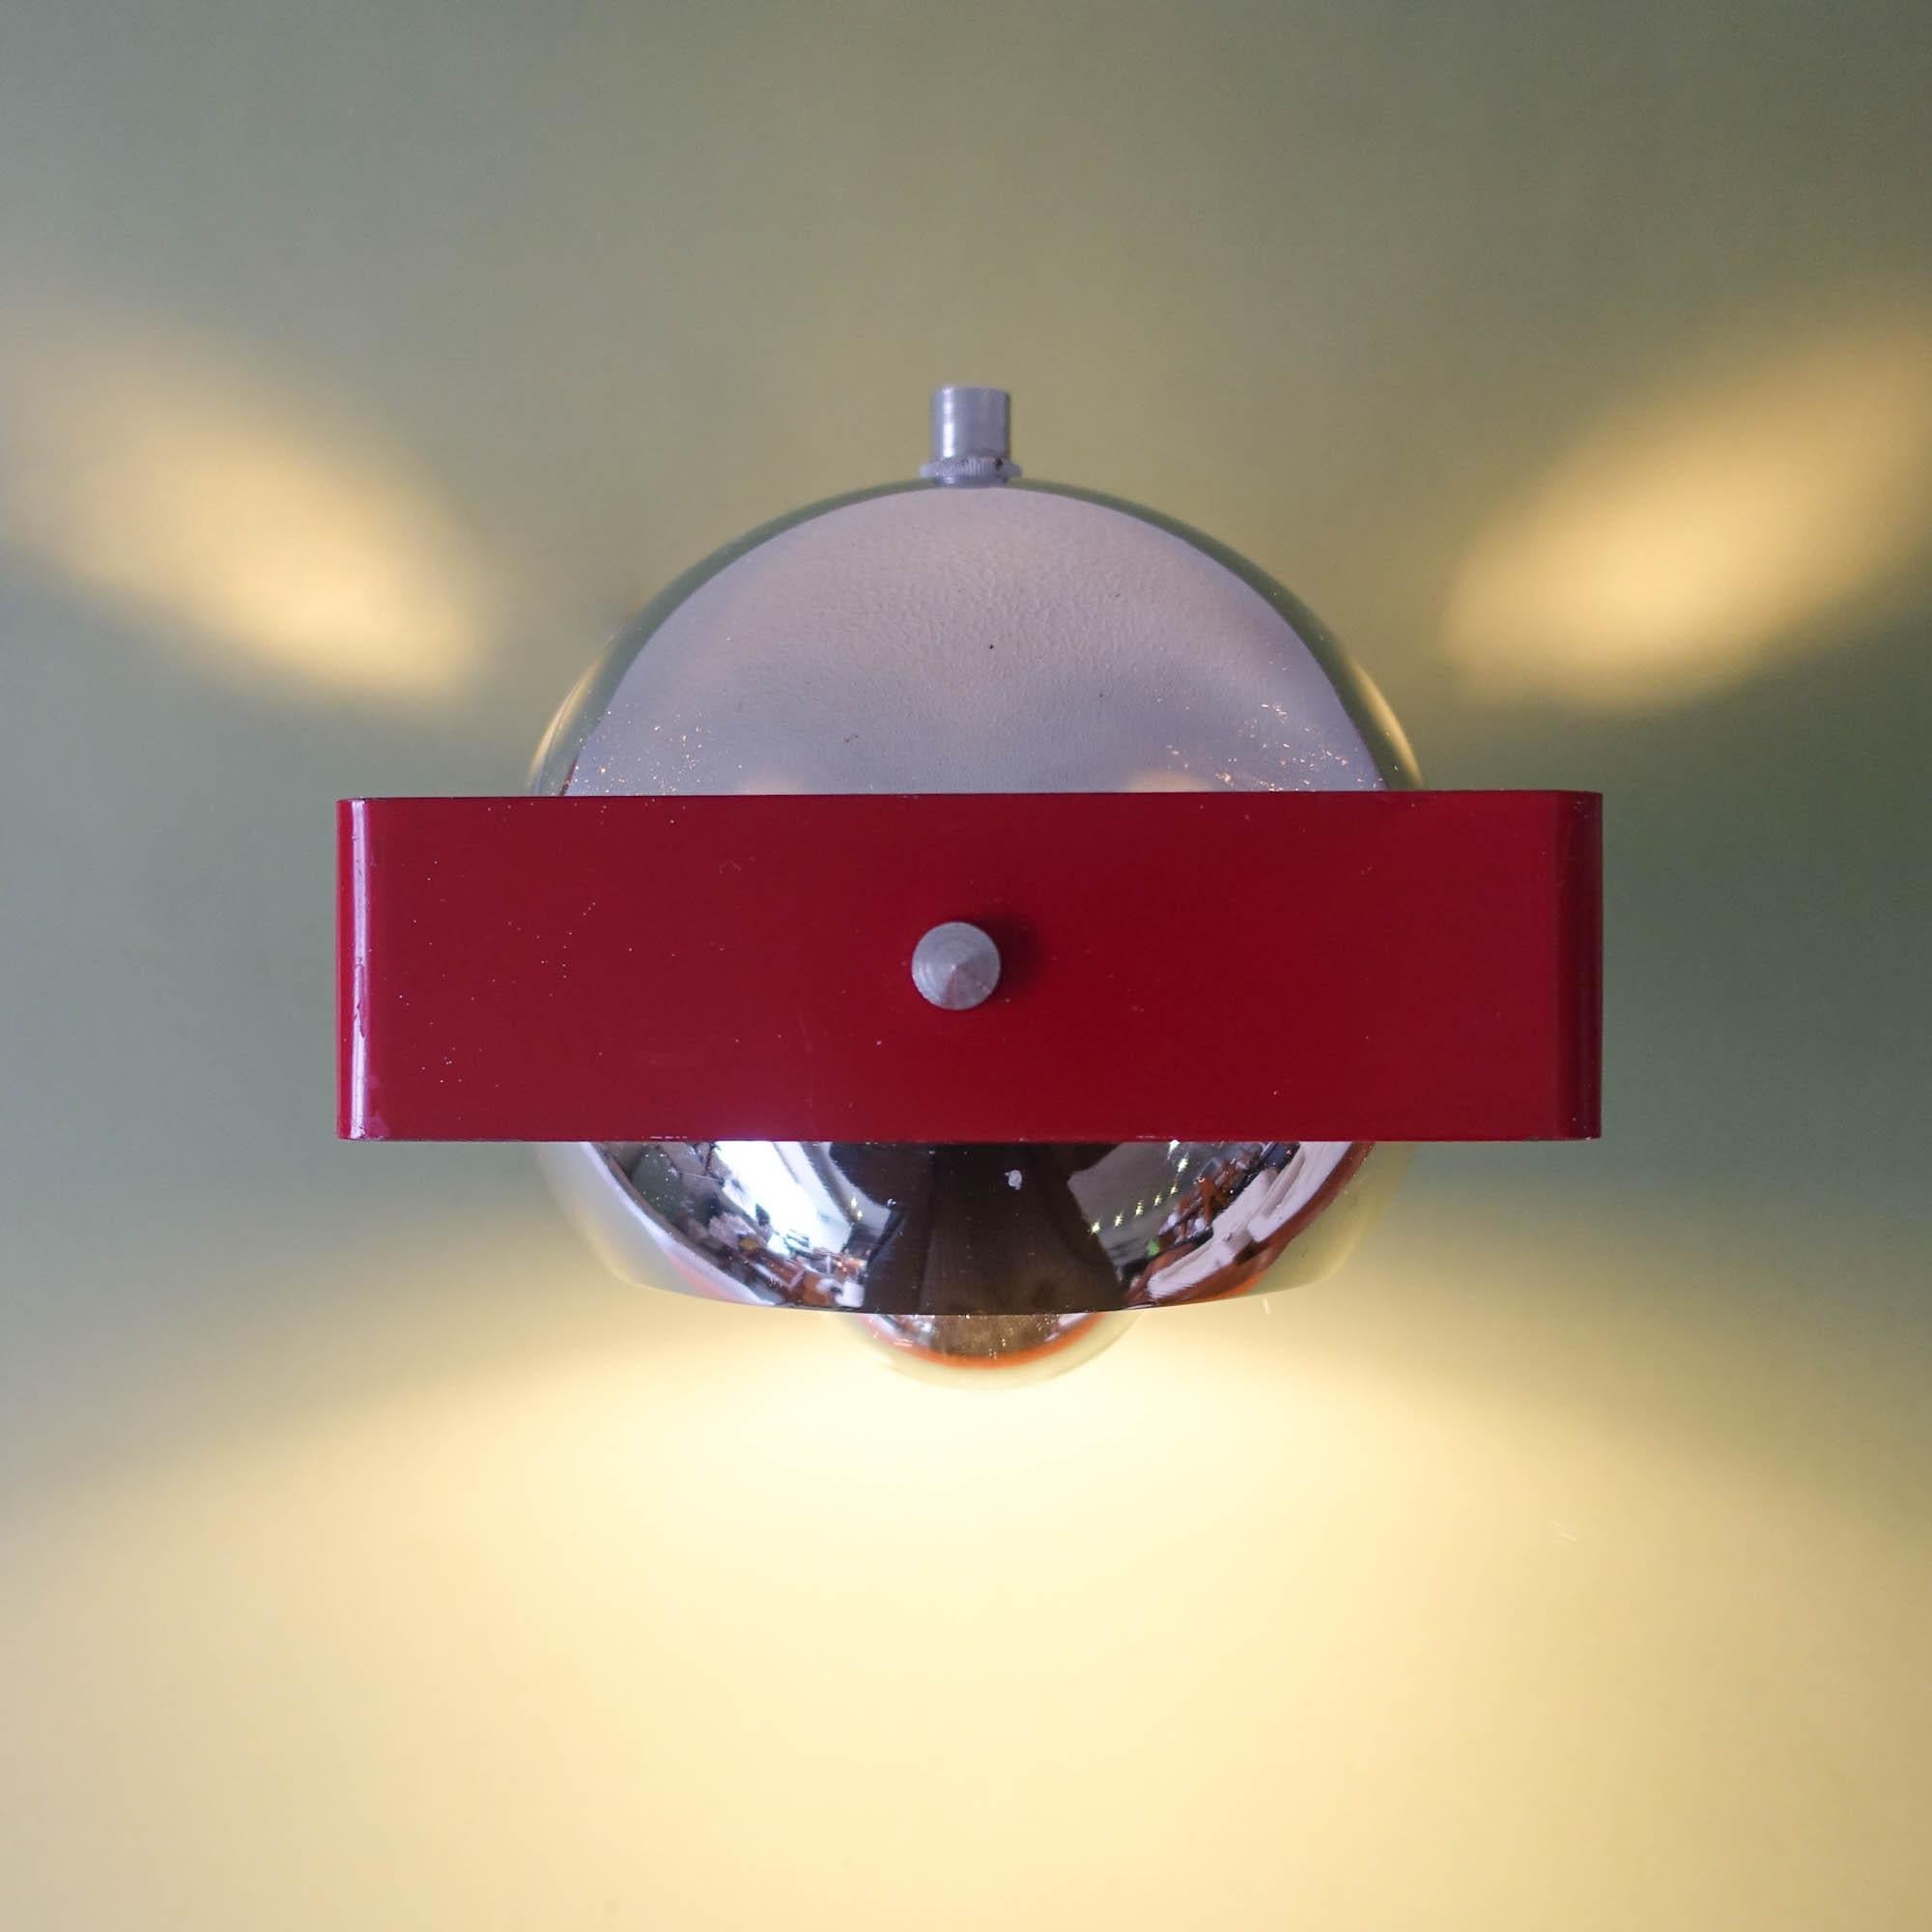 This wall sconce was designed by Luis Perez de la Oliva and produced by Gey, in Spain, during the 1970's. 